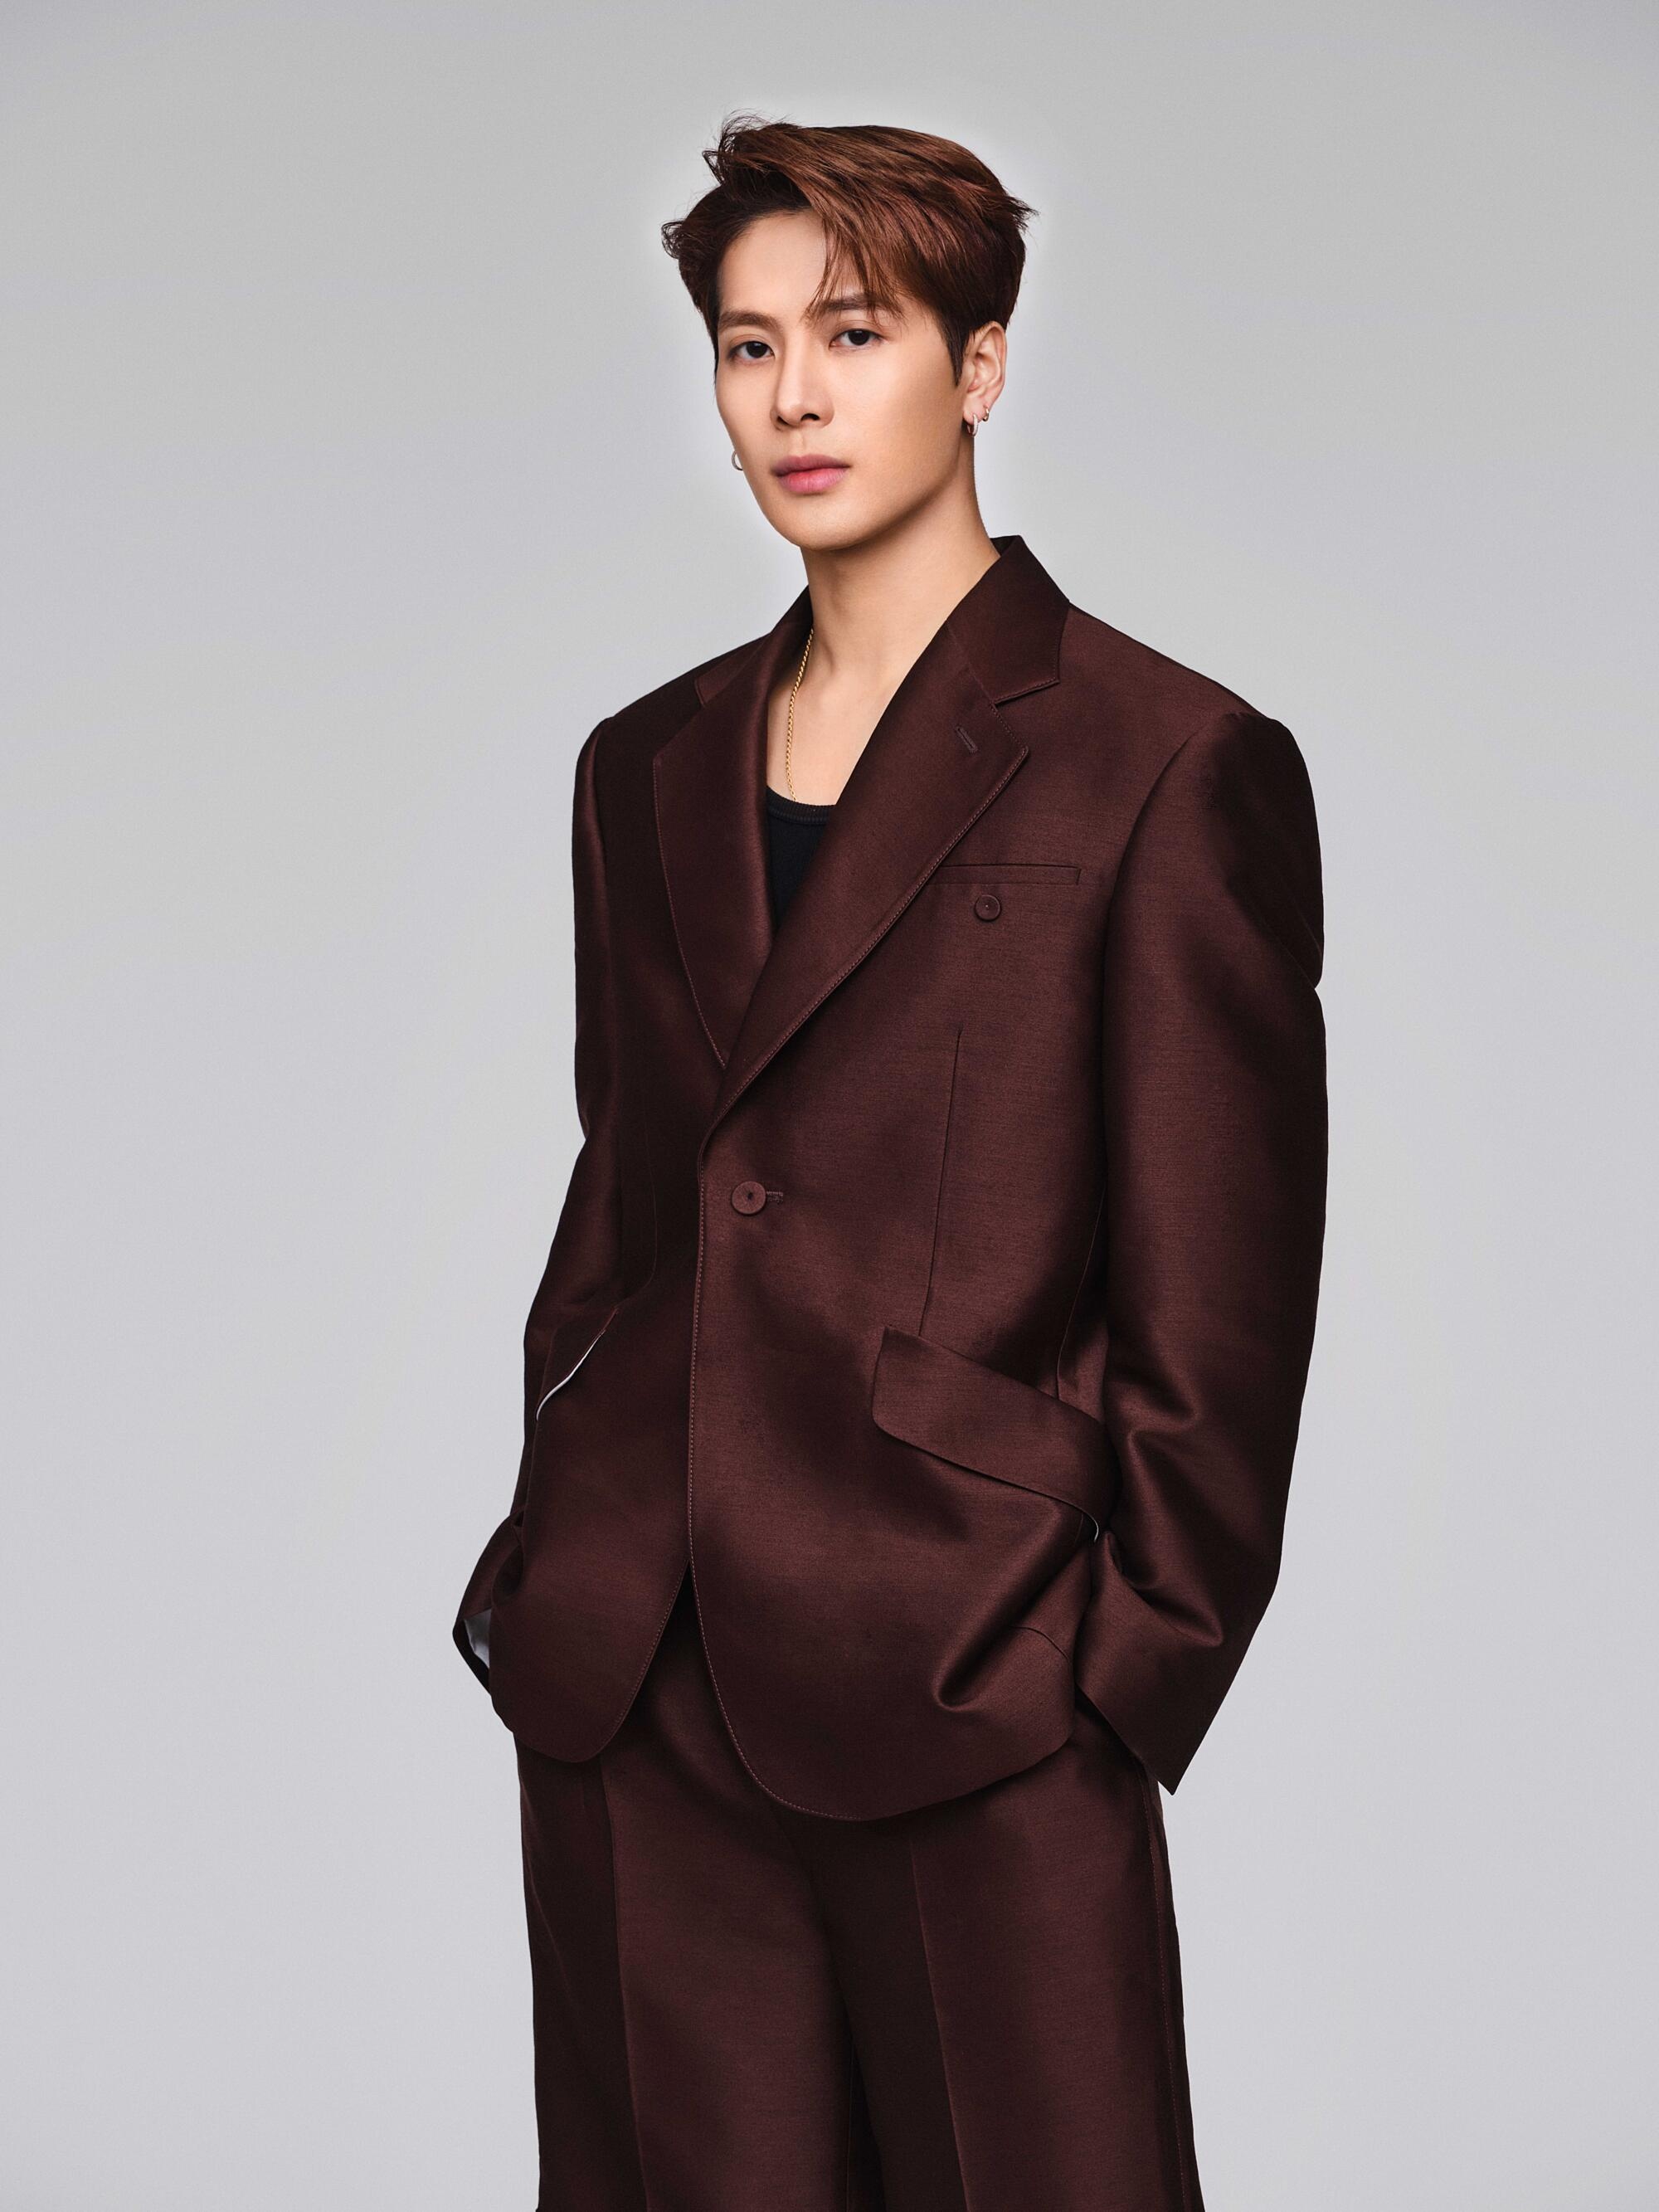 Jackson Wang music, Top 40m artist, New music information, Facts and interviews, 2000x2670 HD Phone